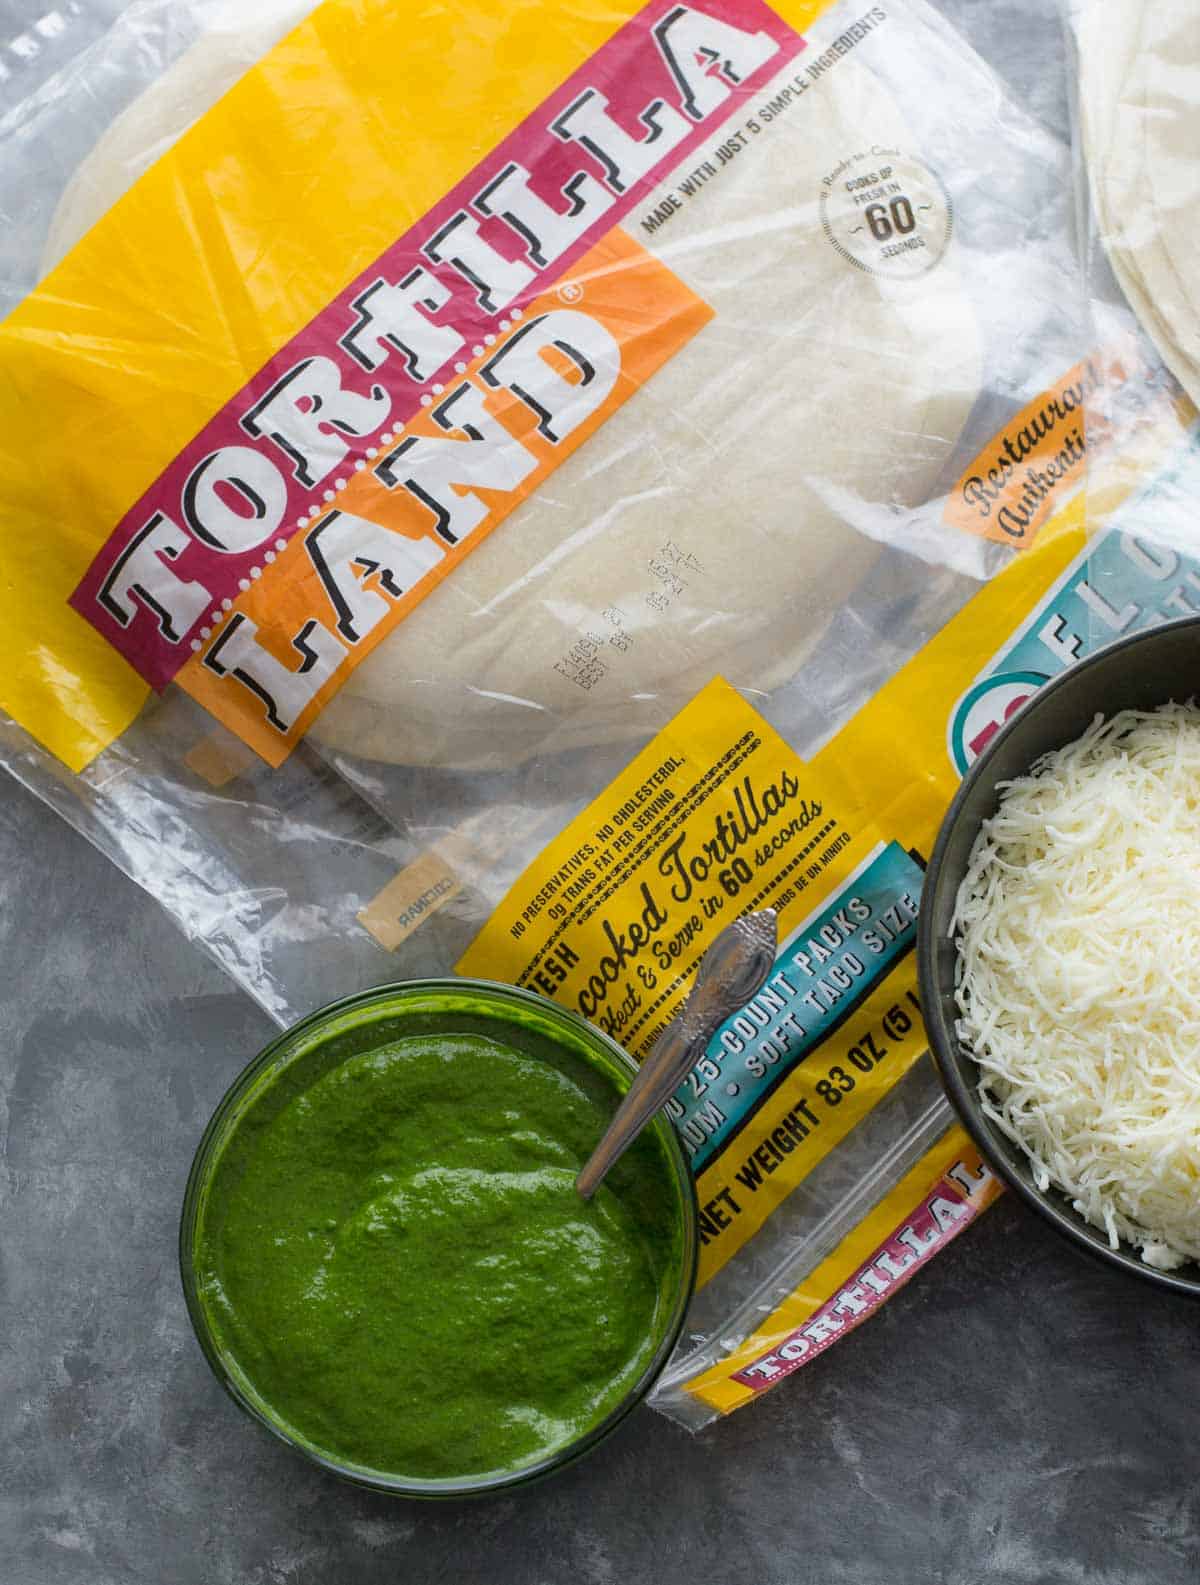 Tortillas in a plastic packet with text Tortilla land. Green chutney and grated cheese are on the side. 